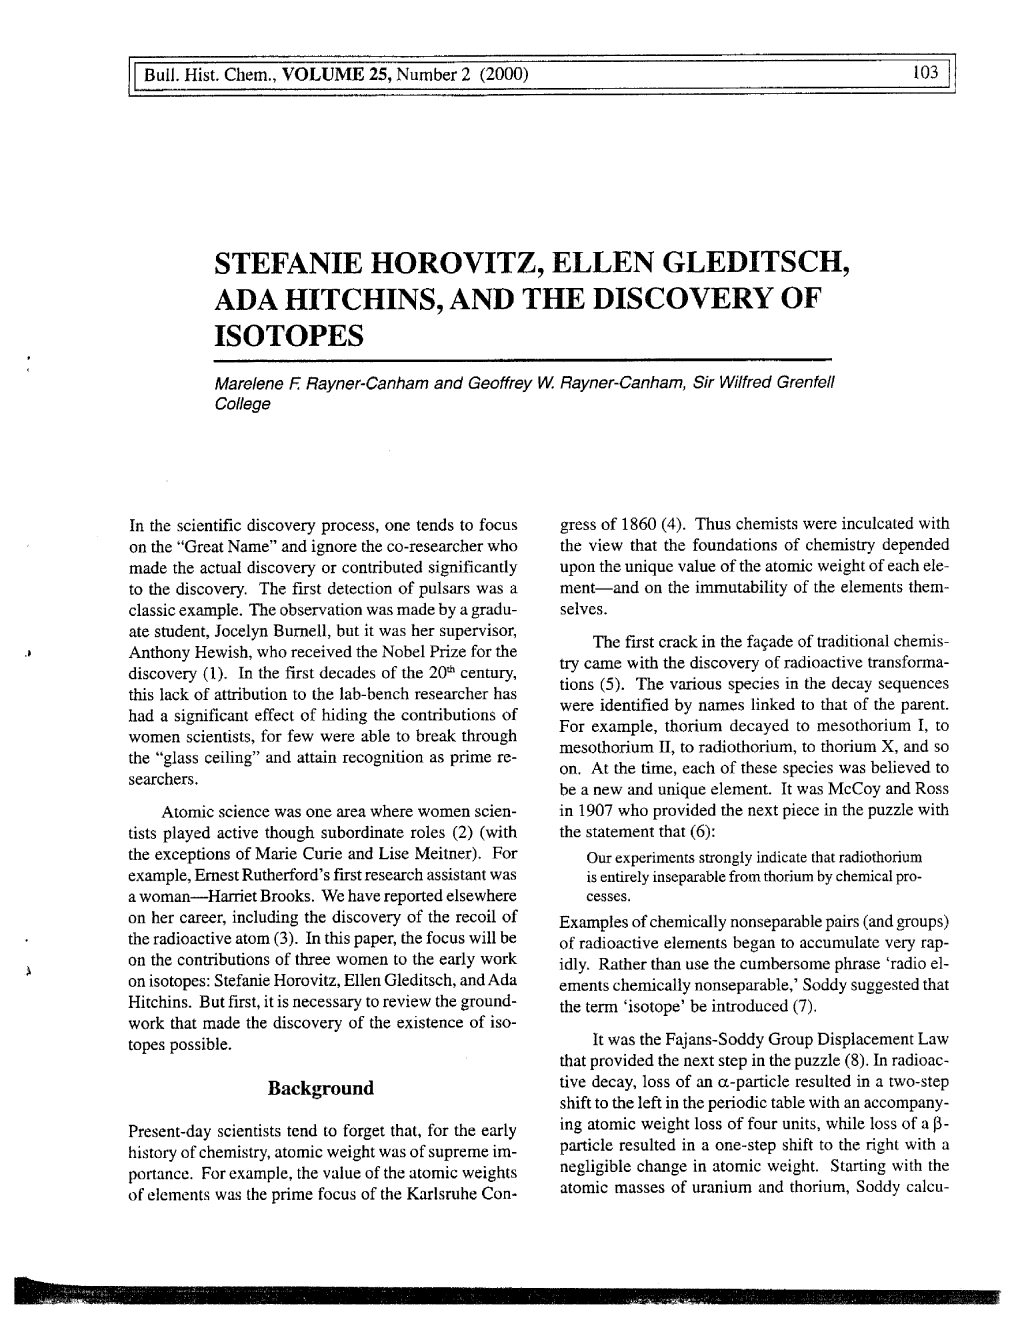 Stefanie Horovitz, Ellen Gleditsch, Ada Hitchins, and the Discovery of Isotopes